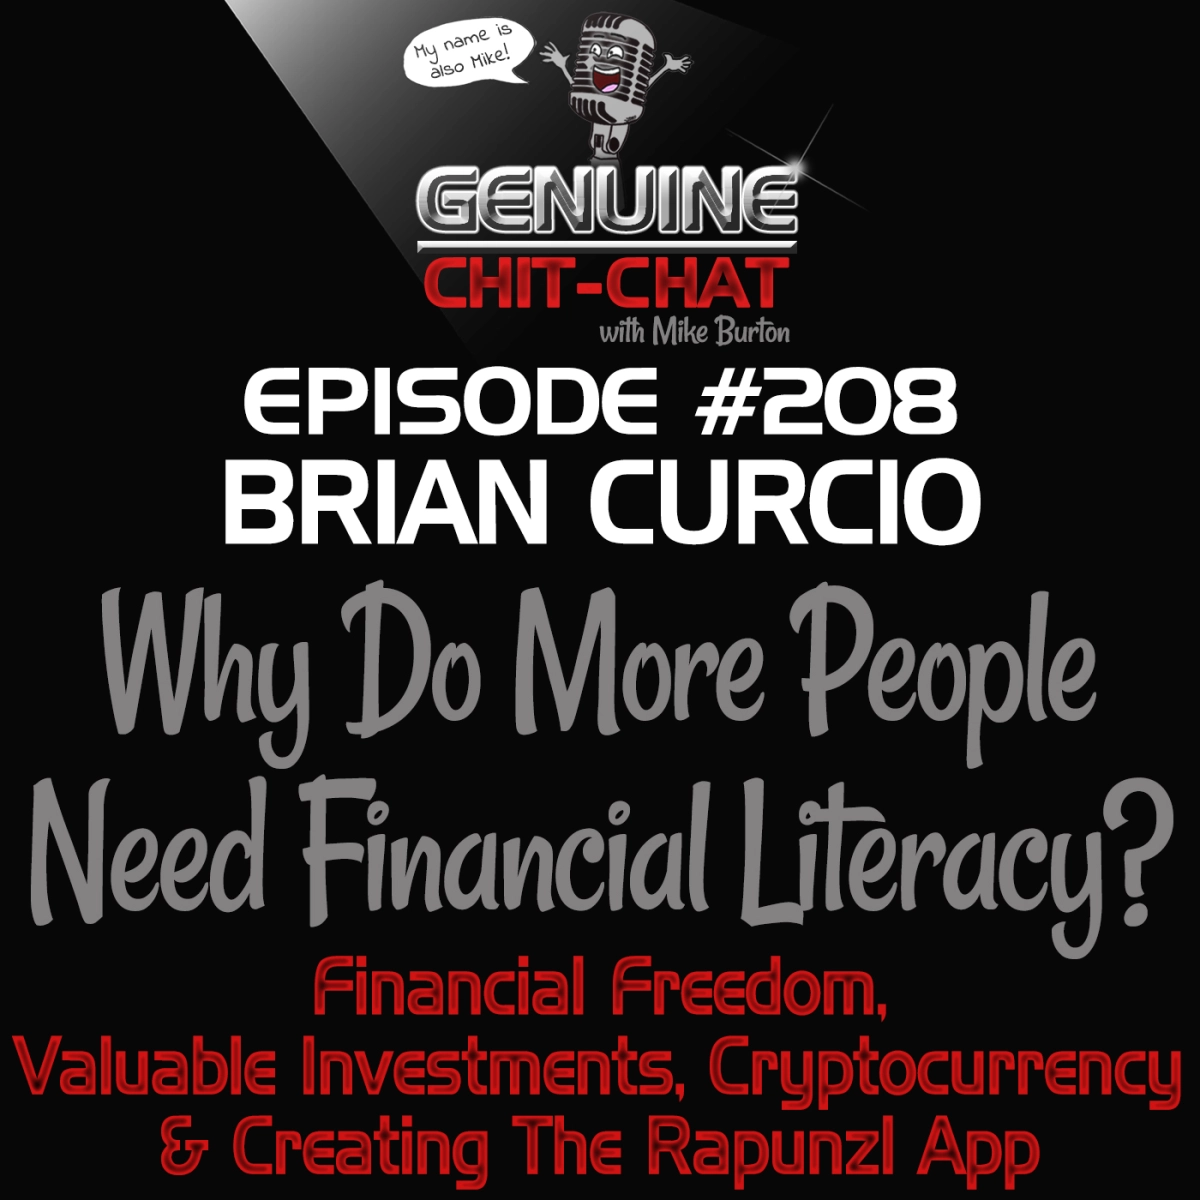 #208 – Why Do More People Need Financial Literacy? Financial Freedom, Valuable Investments, Cryptocurrency & Creating The Rapunzl App With Brian Curcio